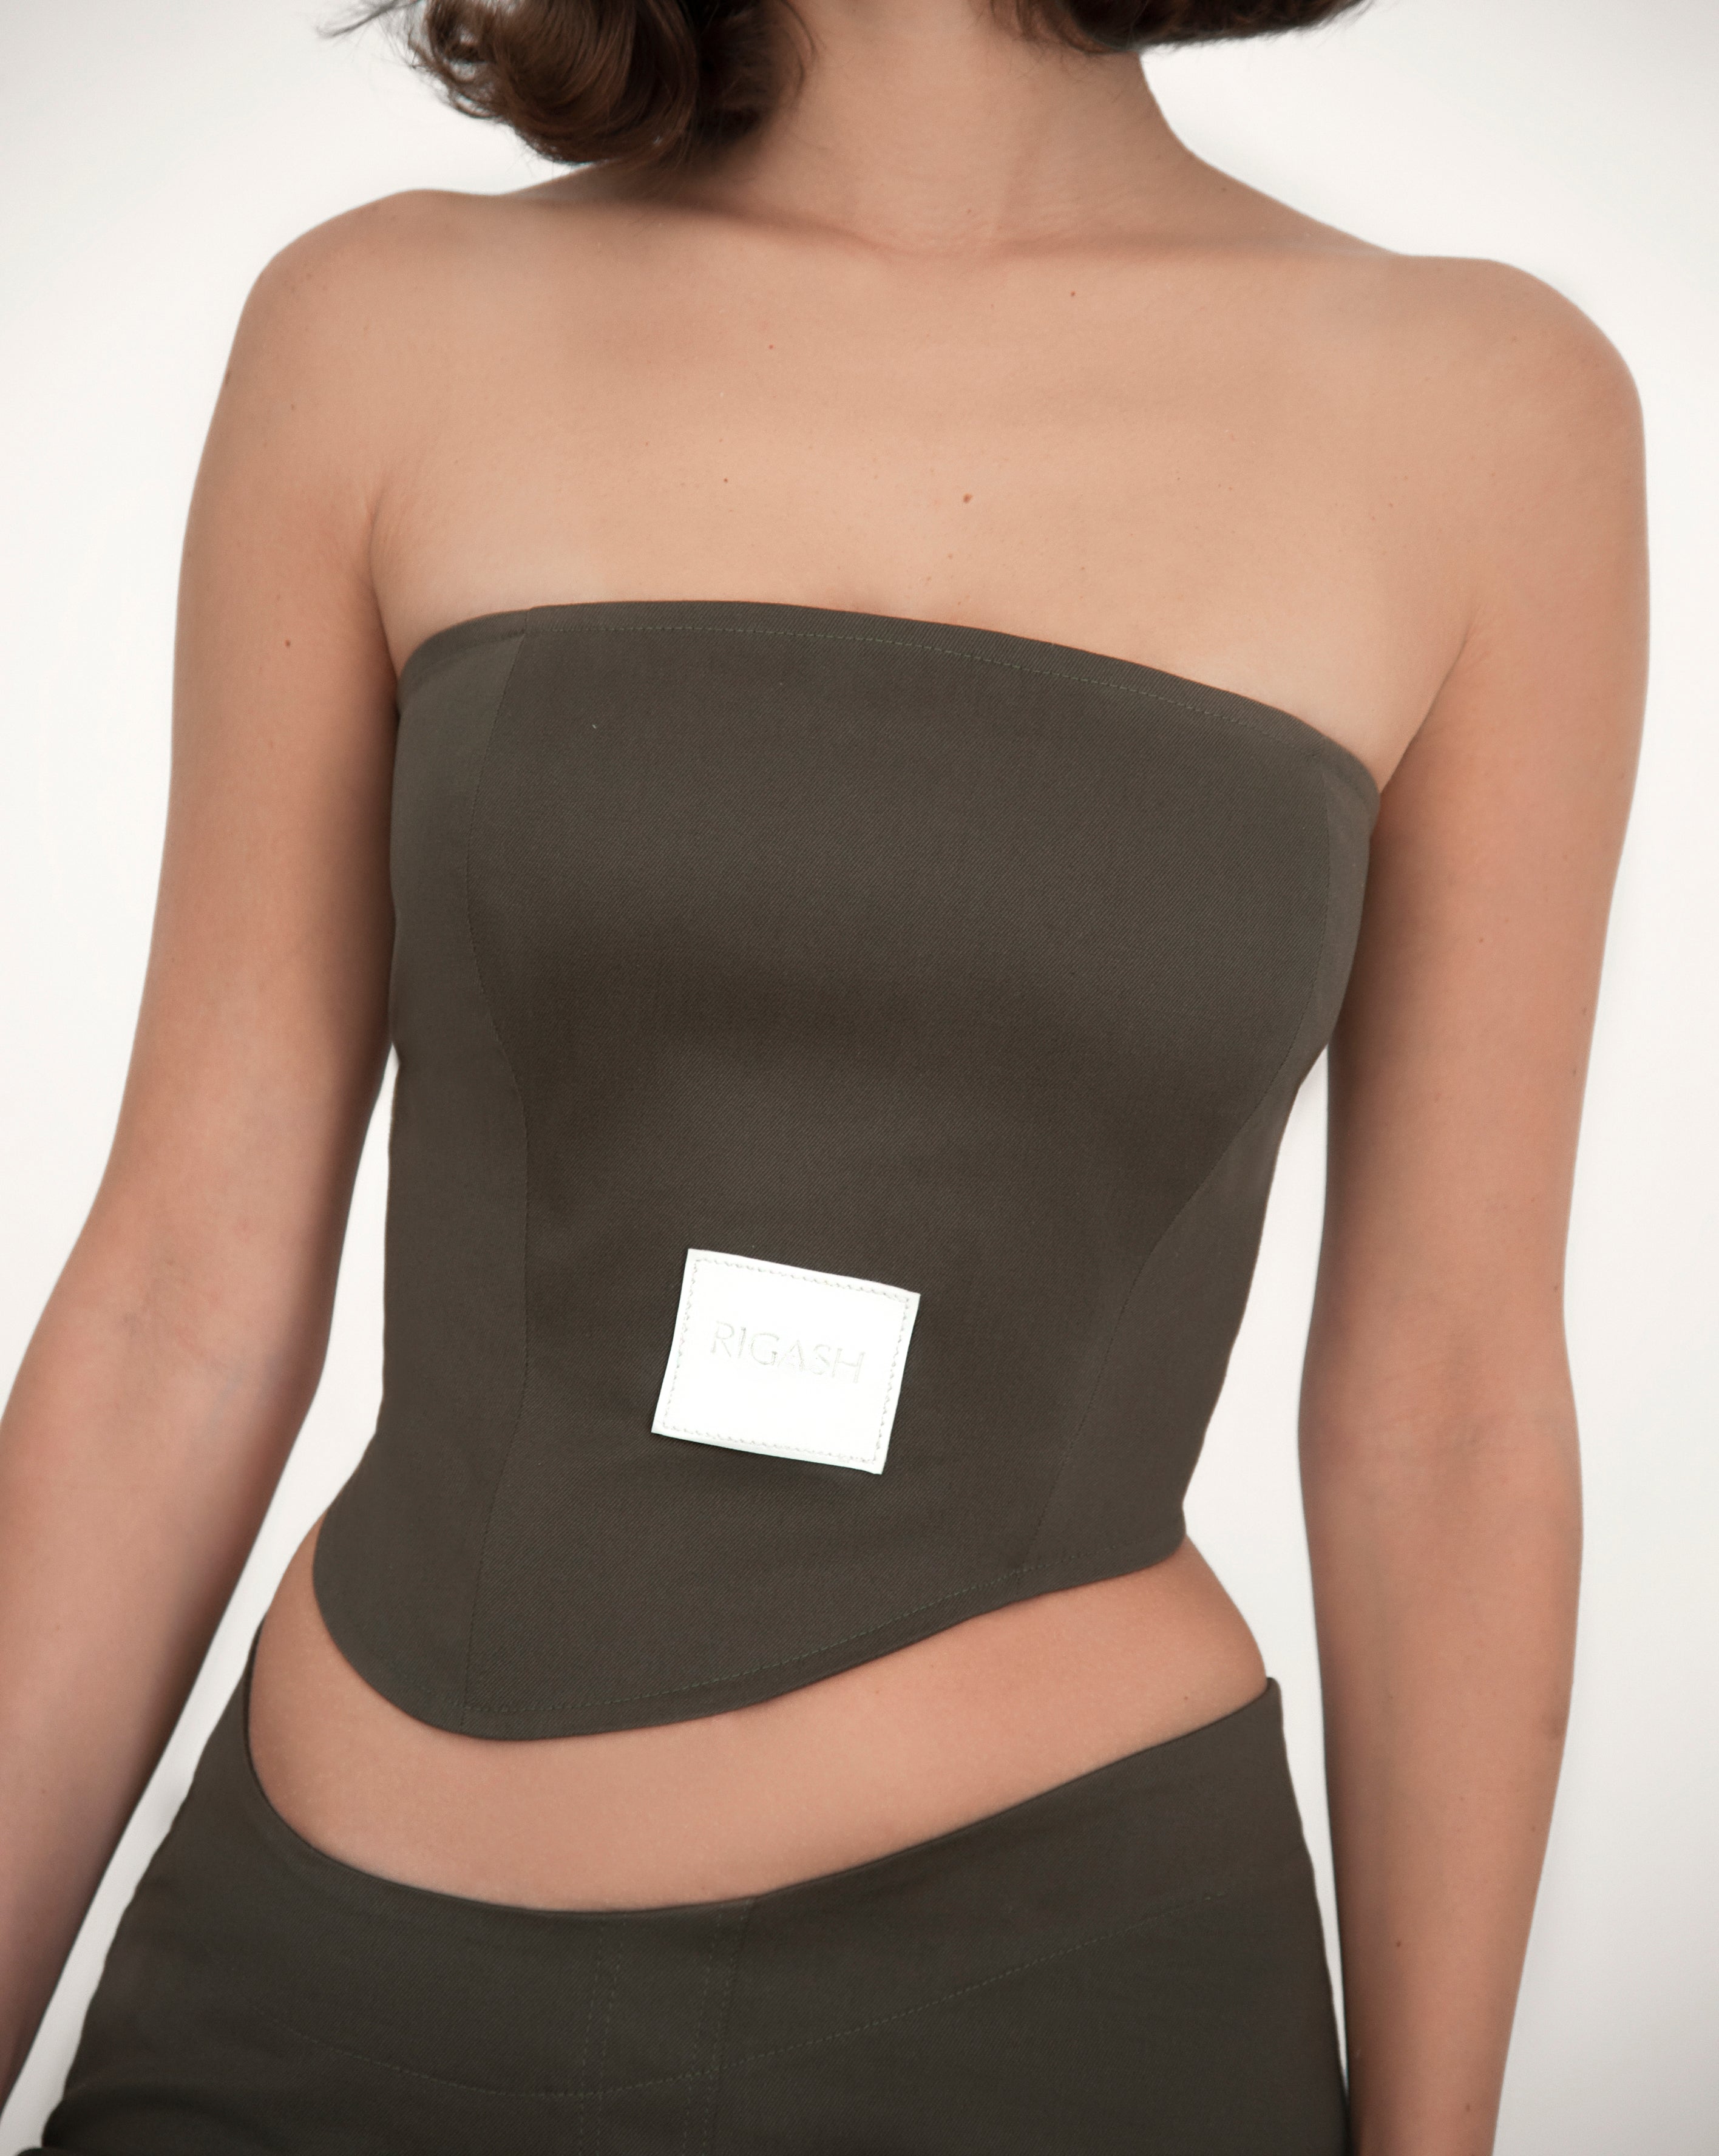 Asymmetrical corset top with a round strapless neckline. Back panels held together by brown leather belt. Visible front leather tag with embossed logo print. 